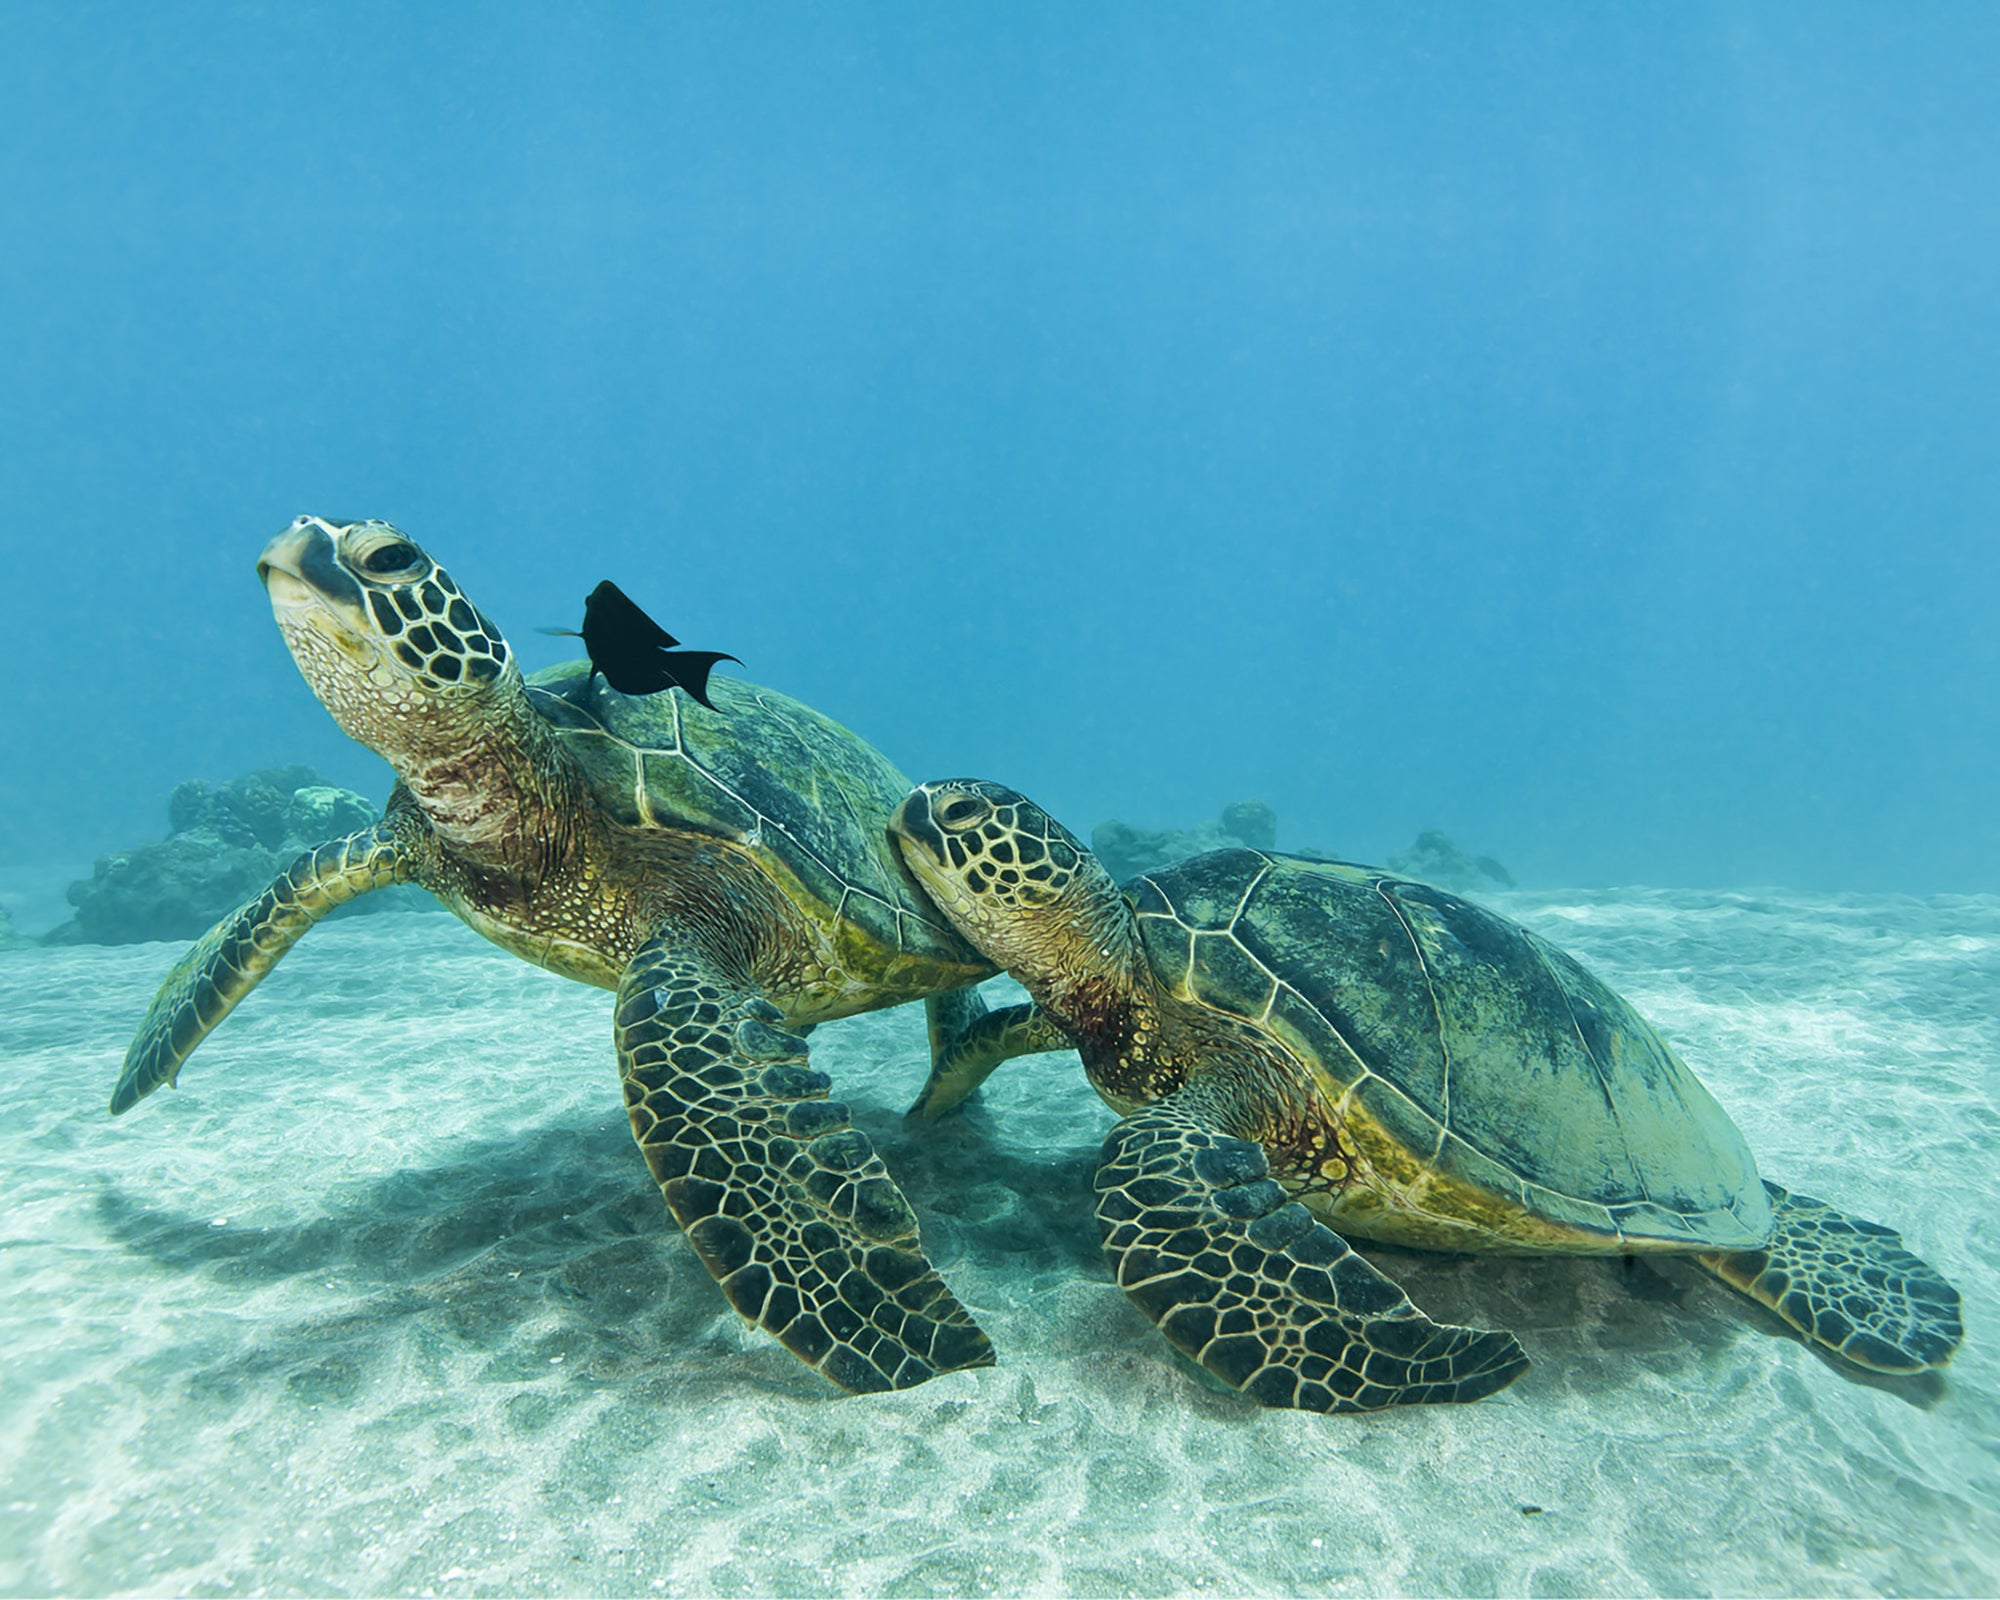 An underwater image of two turtles standing on the bottom of the ocean getting cleaned by some fish. The smaller turtle seems to be leaning on the larger one. The image was taken near Olawalu on Maui.